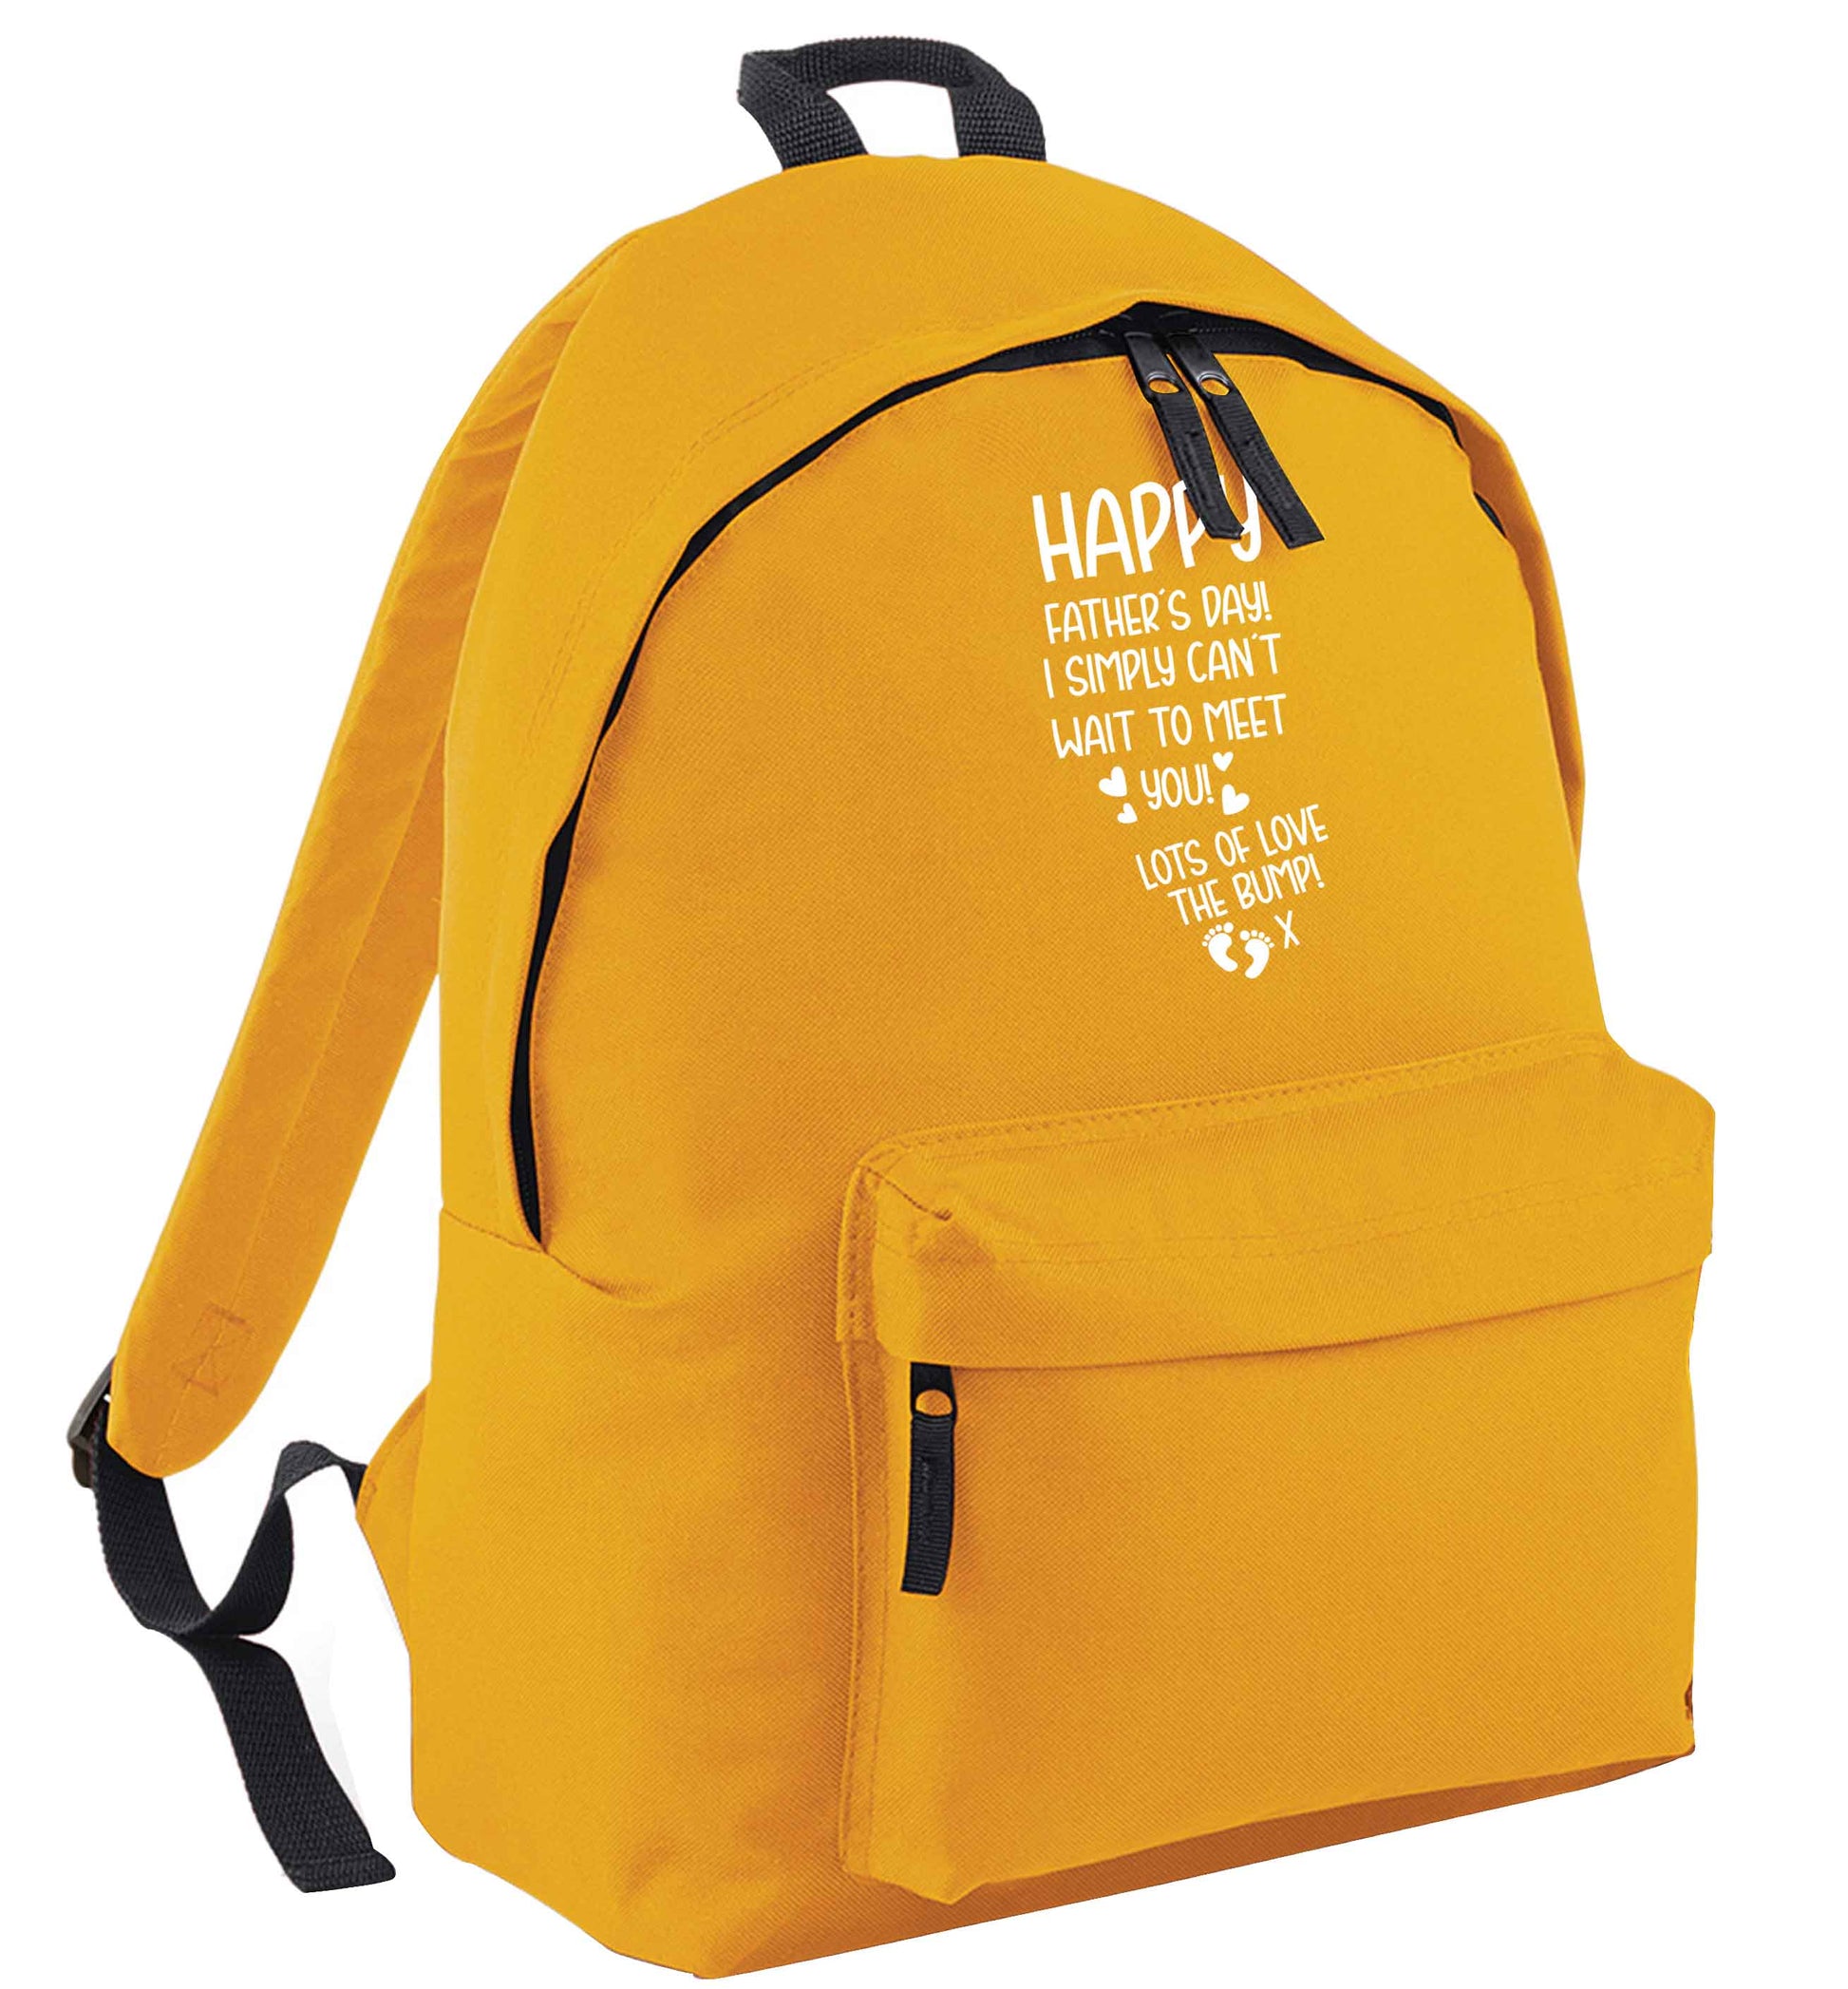 Happy Father's day daddy I can't wait to meet you lot's of love the bump! mustard adults backpack